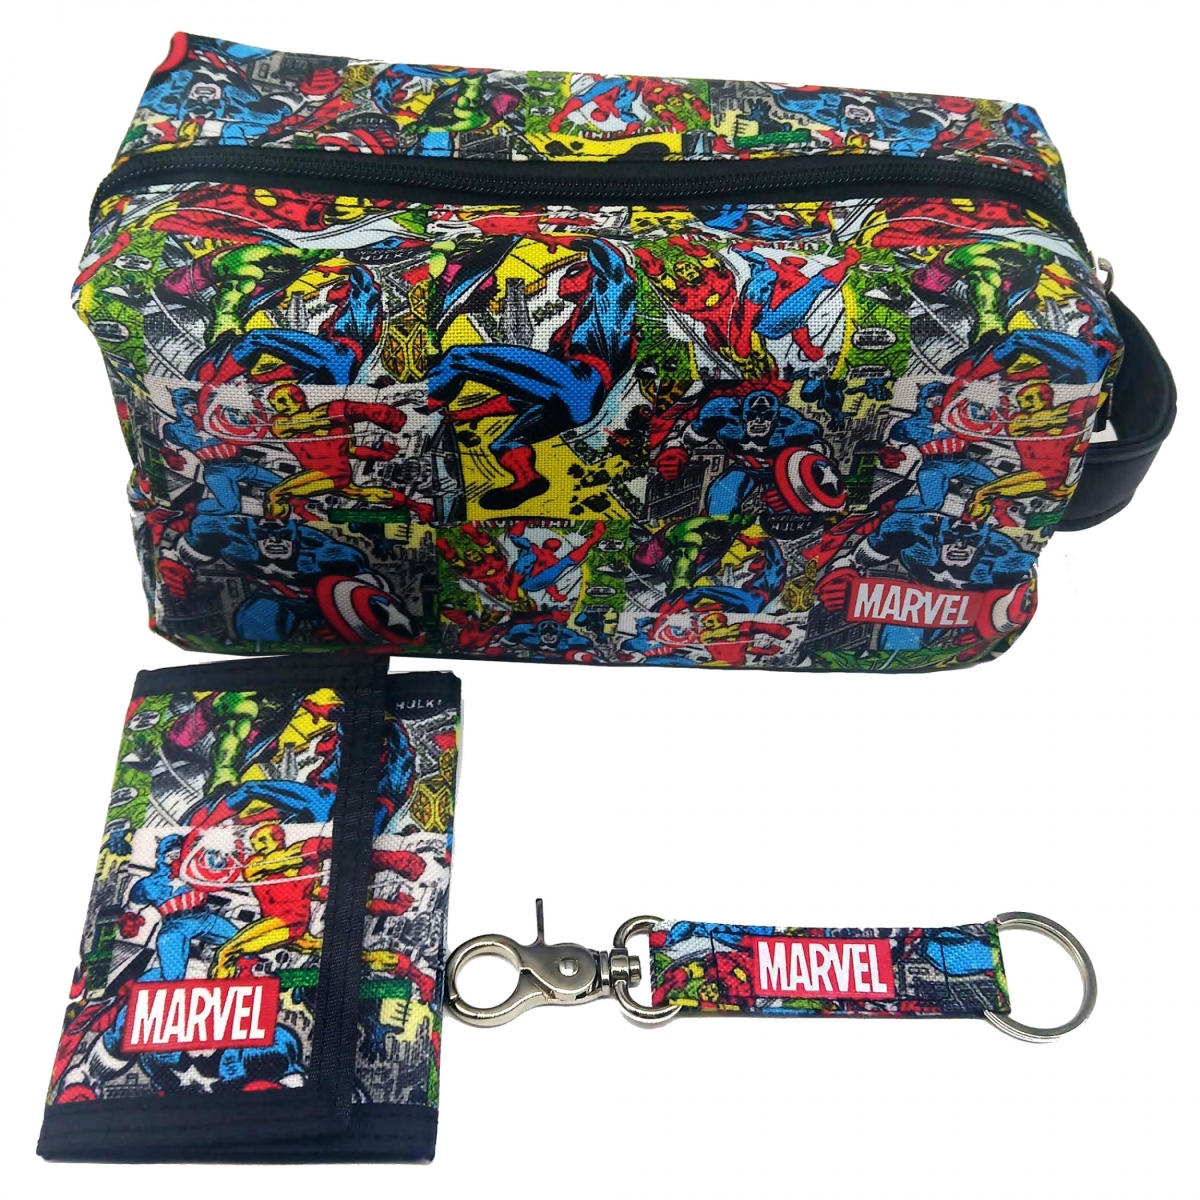 Picture of Avengers 850791 Marvel Avengers Classic Comic Art Grooming Bag Set - 3 Piece